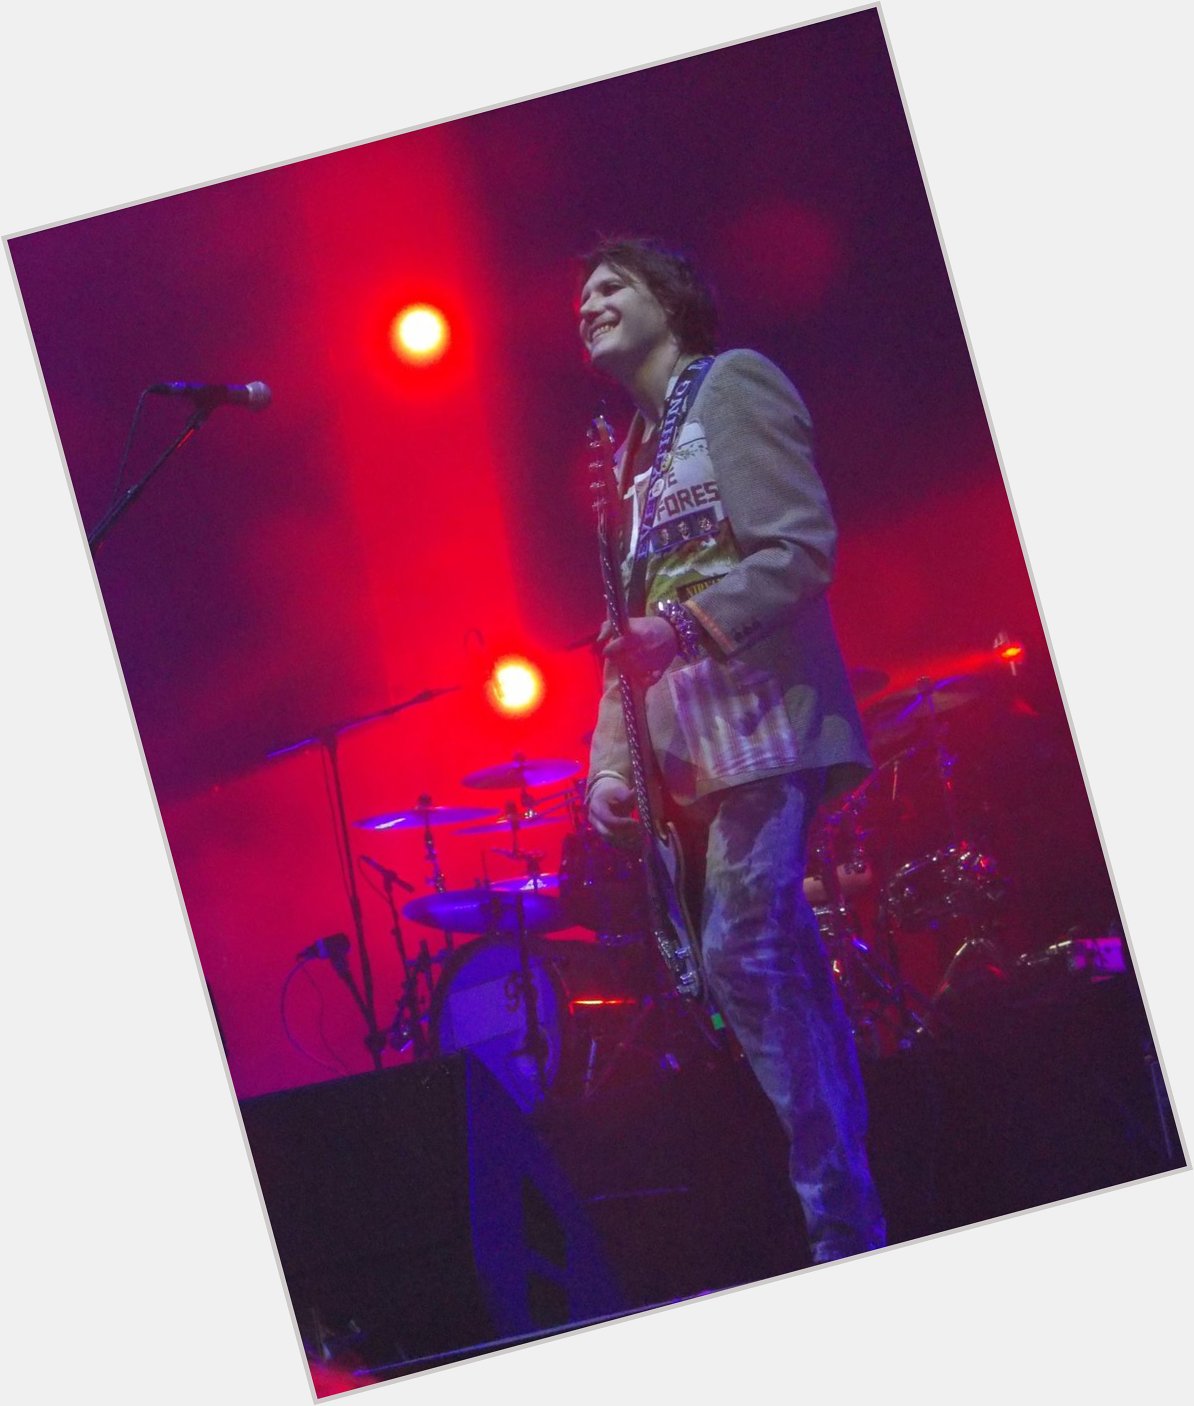 Happy birthday to the best legs and smile in music. The genius that is Nicky Wire!   